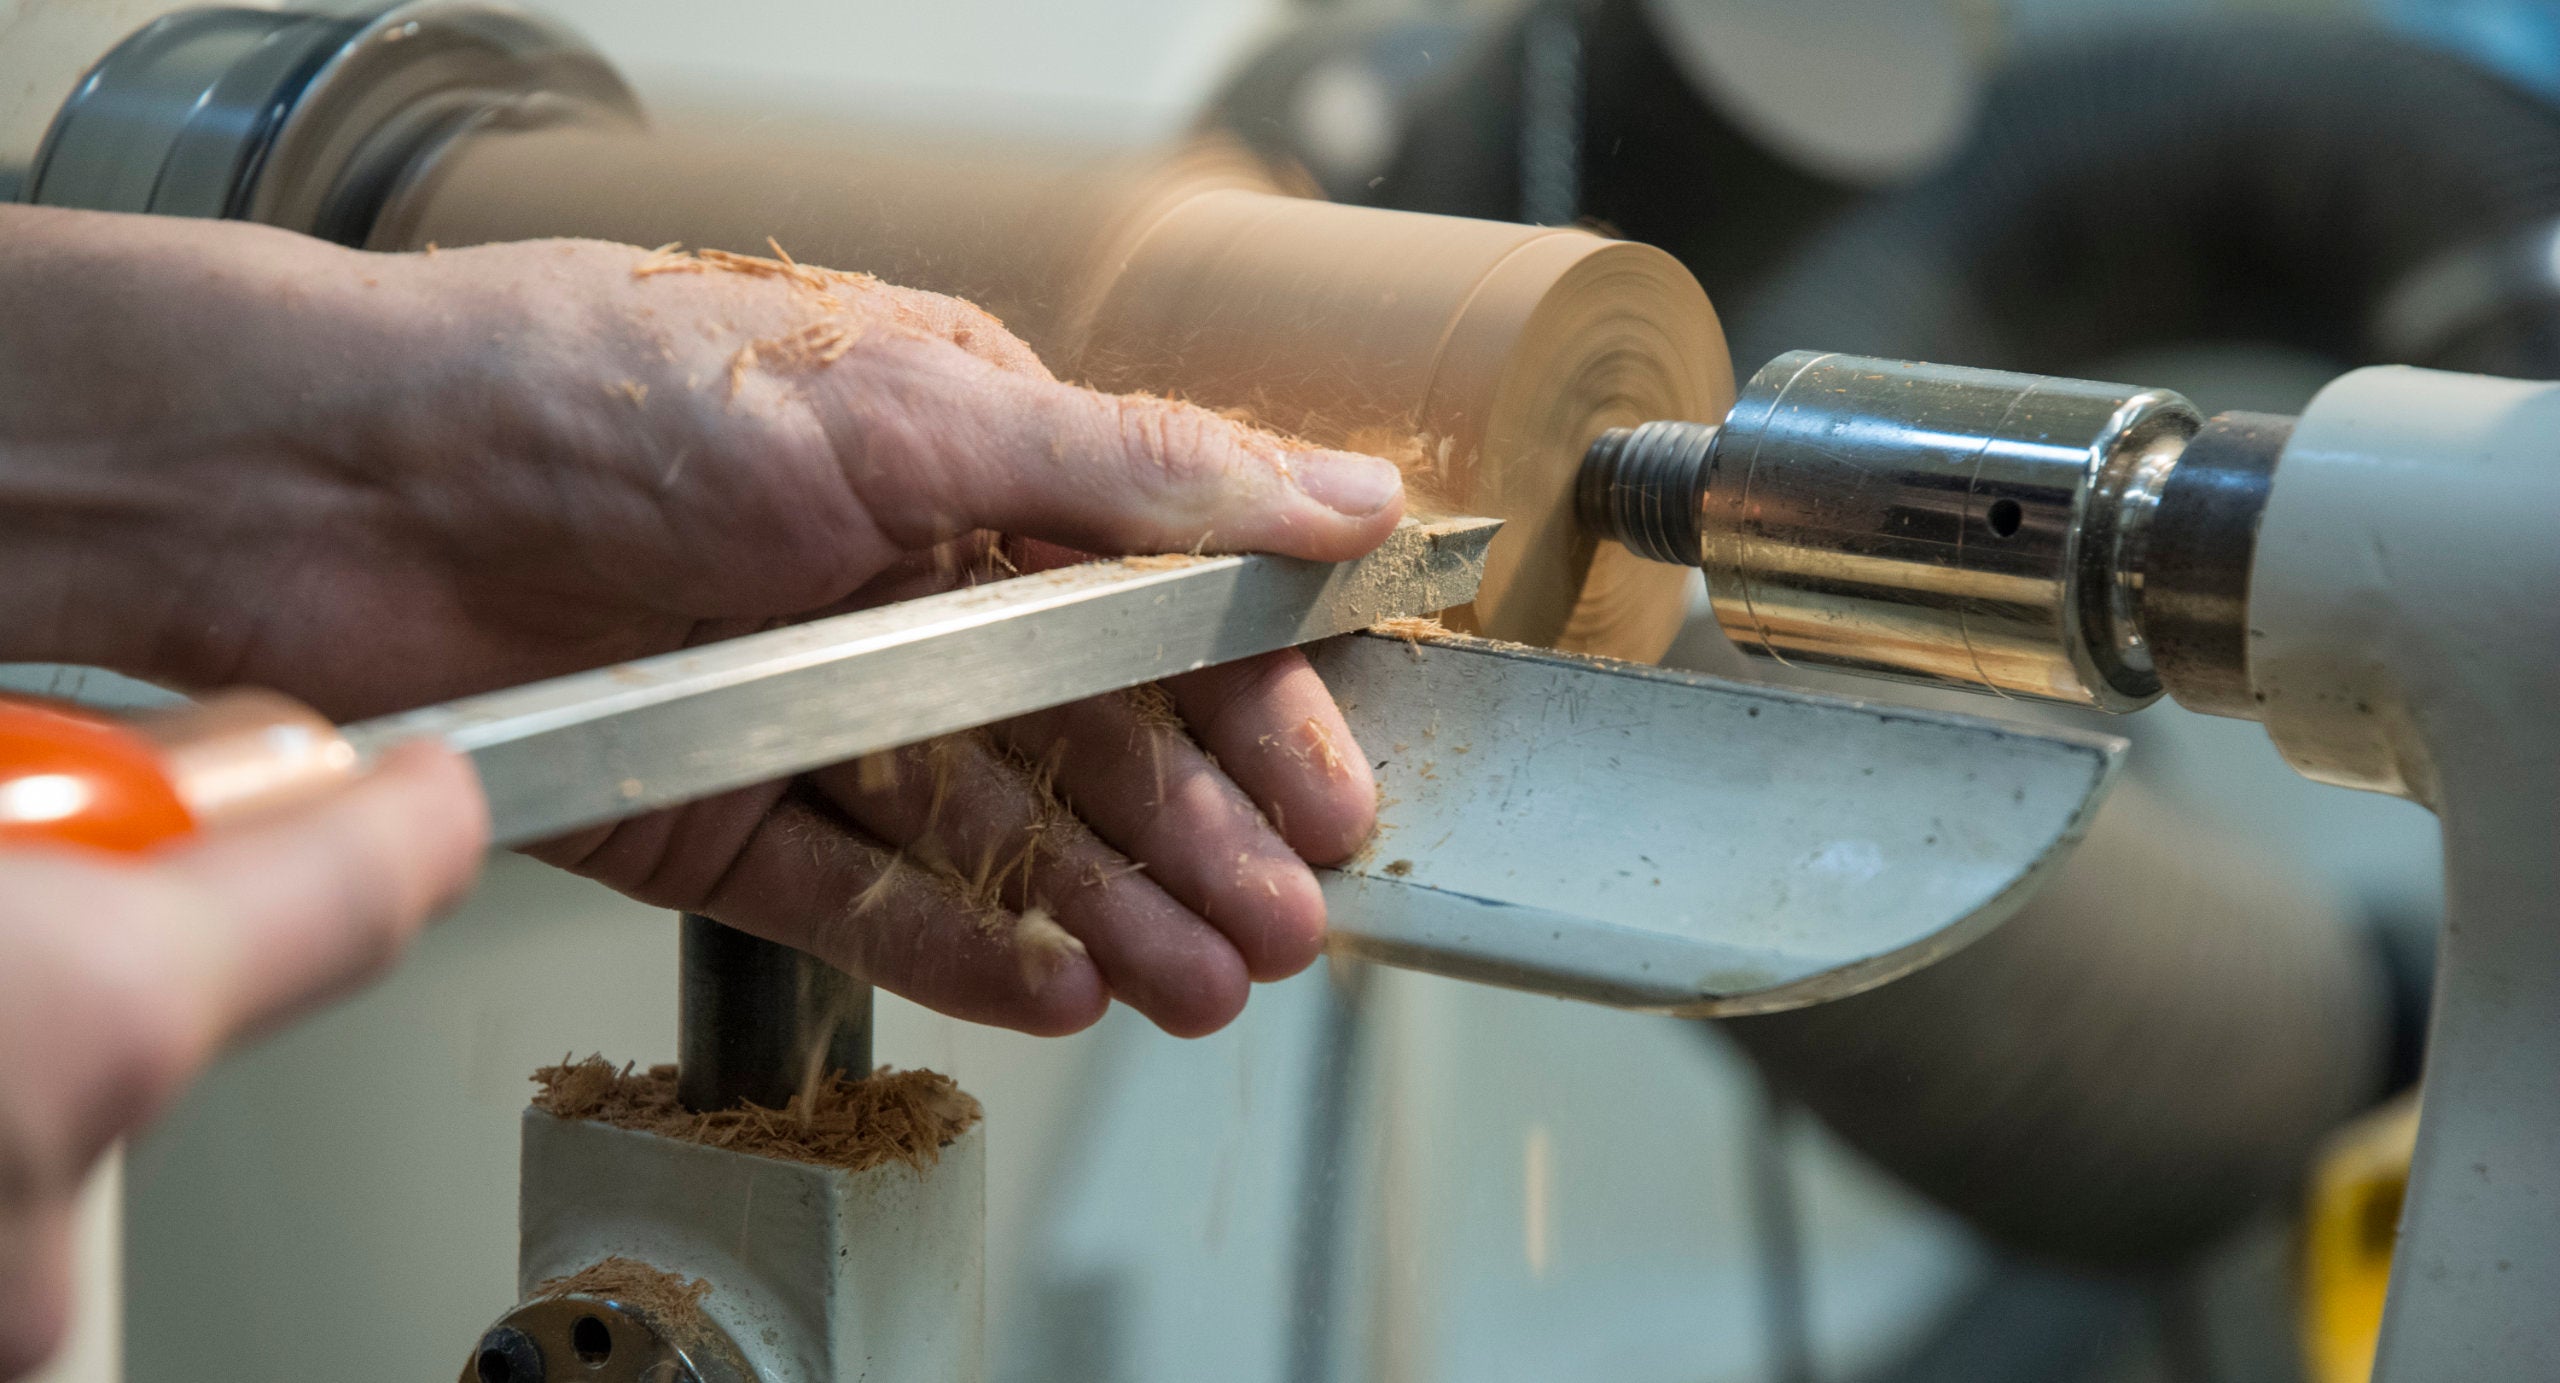 Closeup of hands working with wood on a lathe.